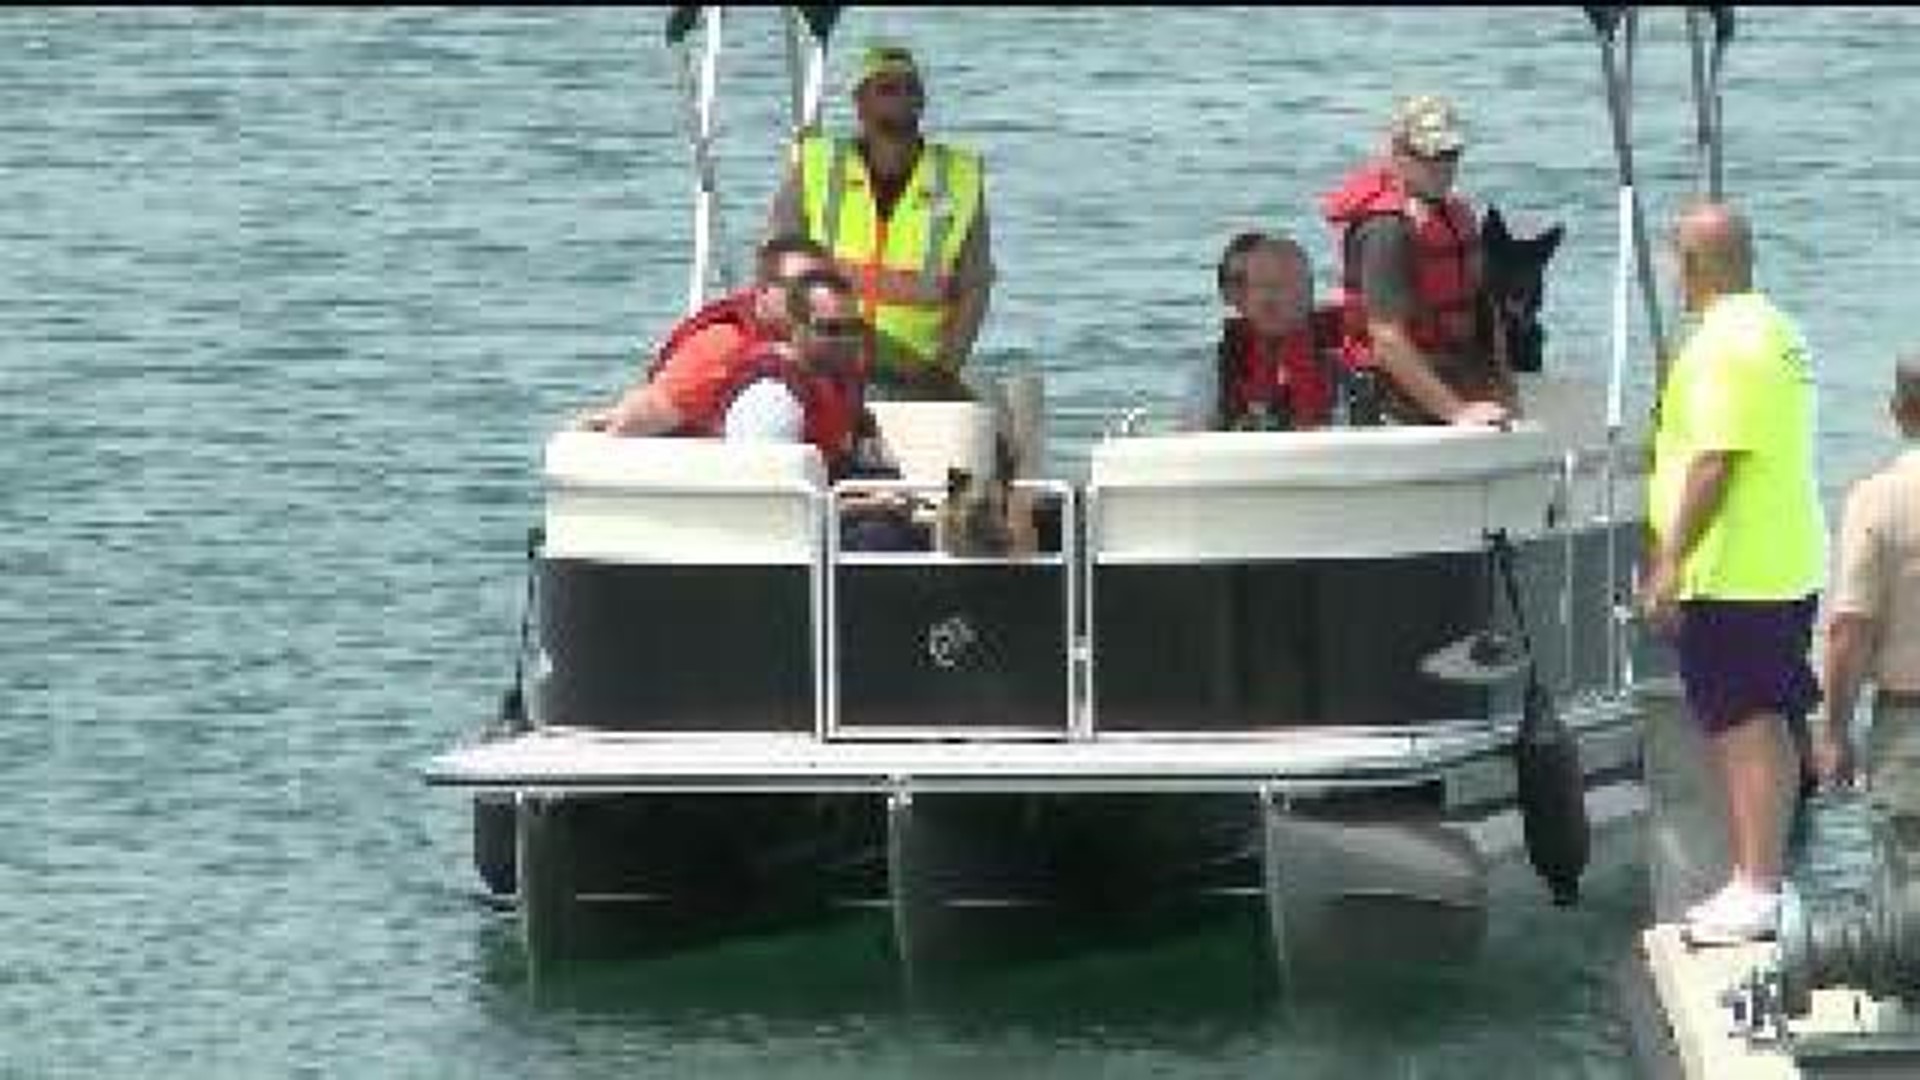 Search Continues for Missing Spearfisherman